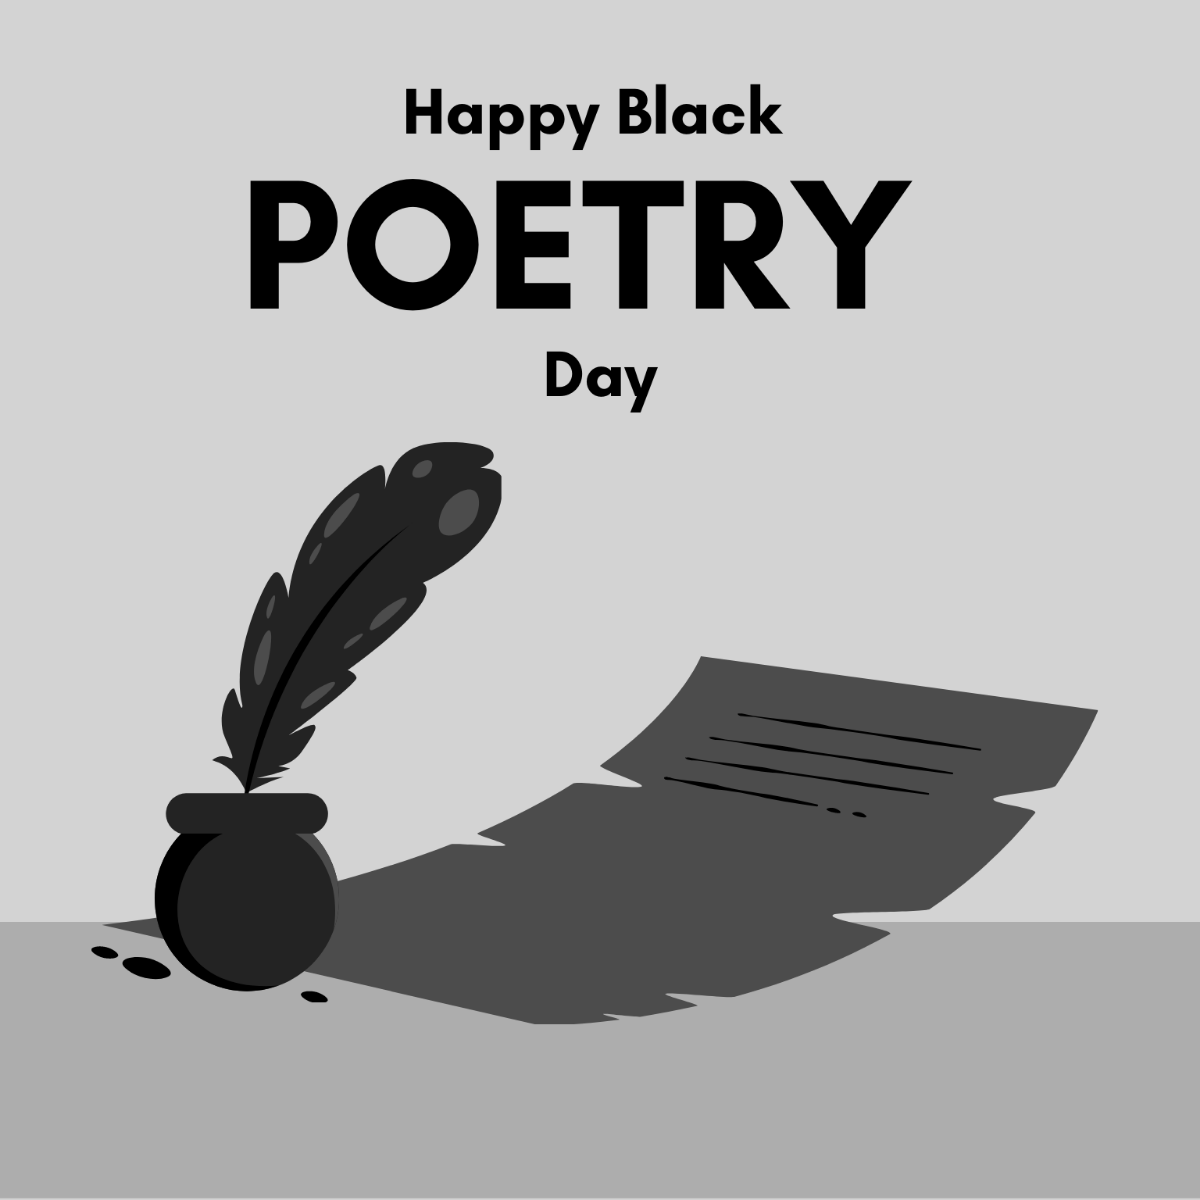 Free Happy Black Poetry Day Illustration Template